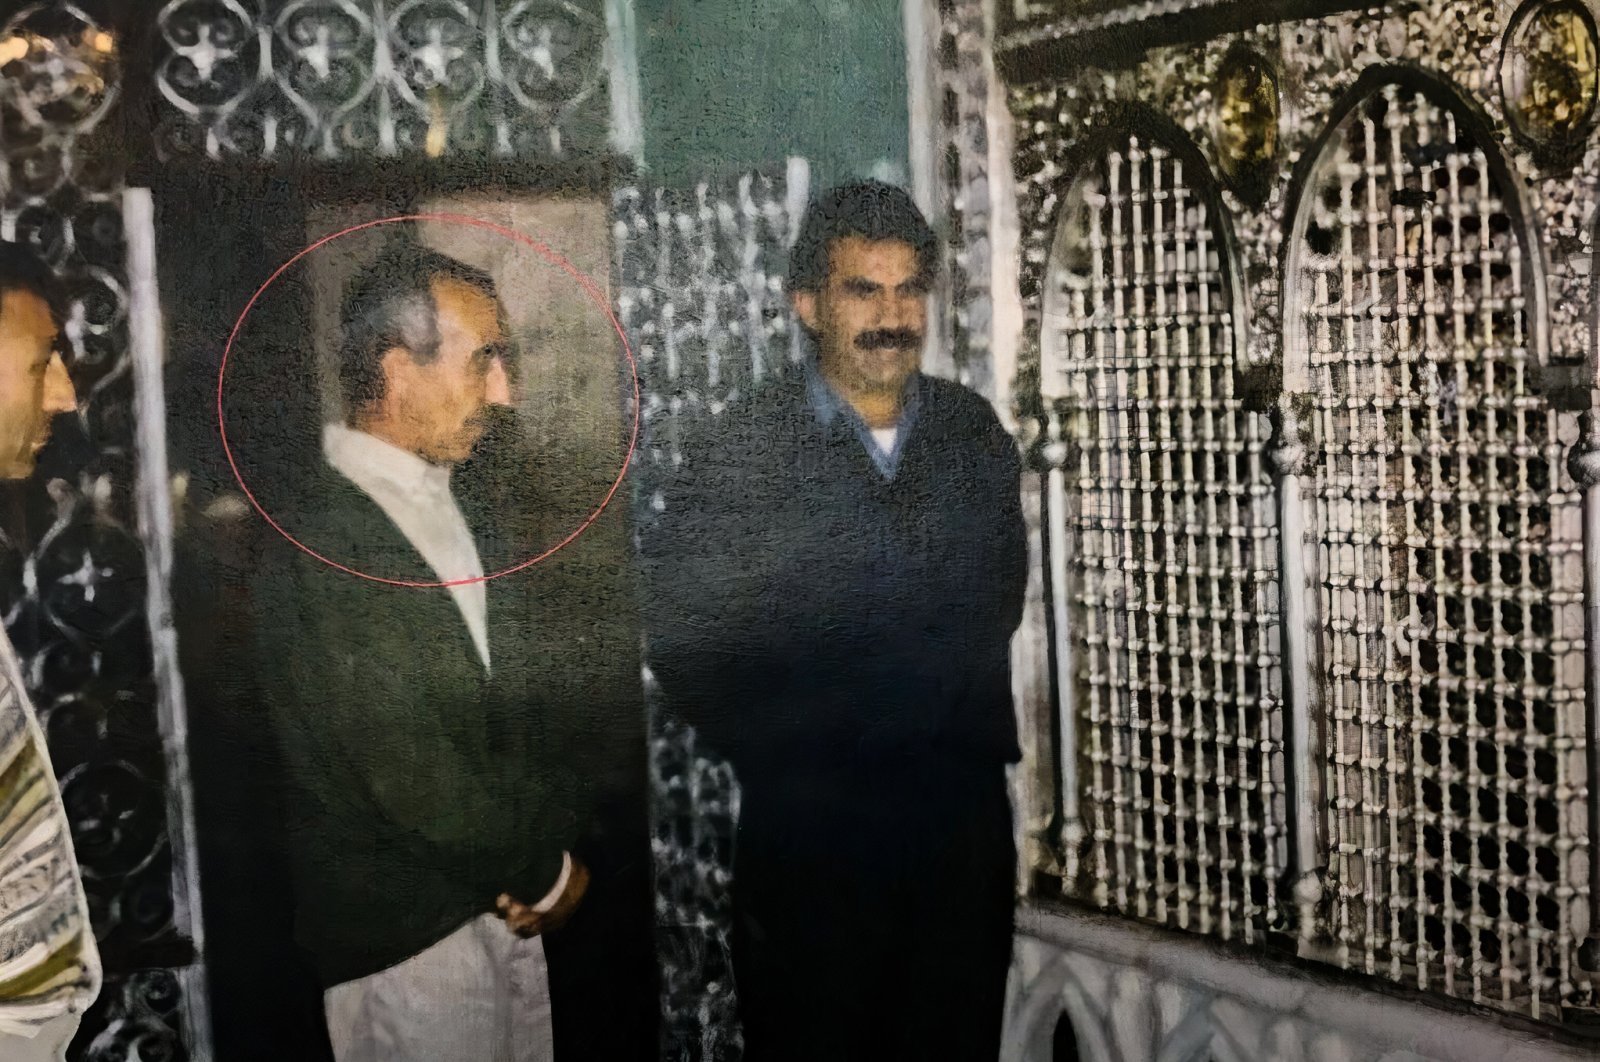 Ali Haydar Kaytan (C) is seen with jailed PKK leader Abdullah Öcalan (R) in an unknown place. (Photo by security sources)